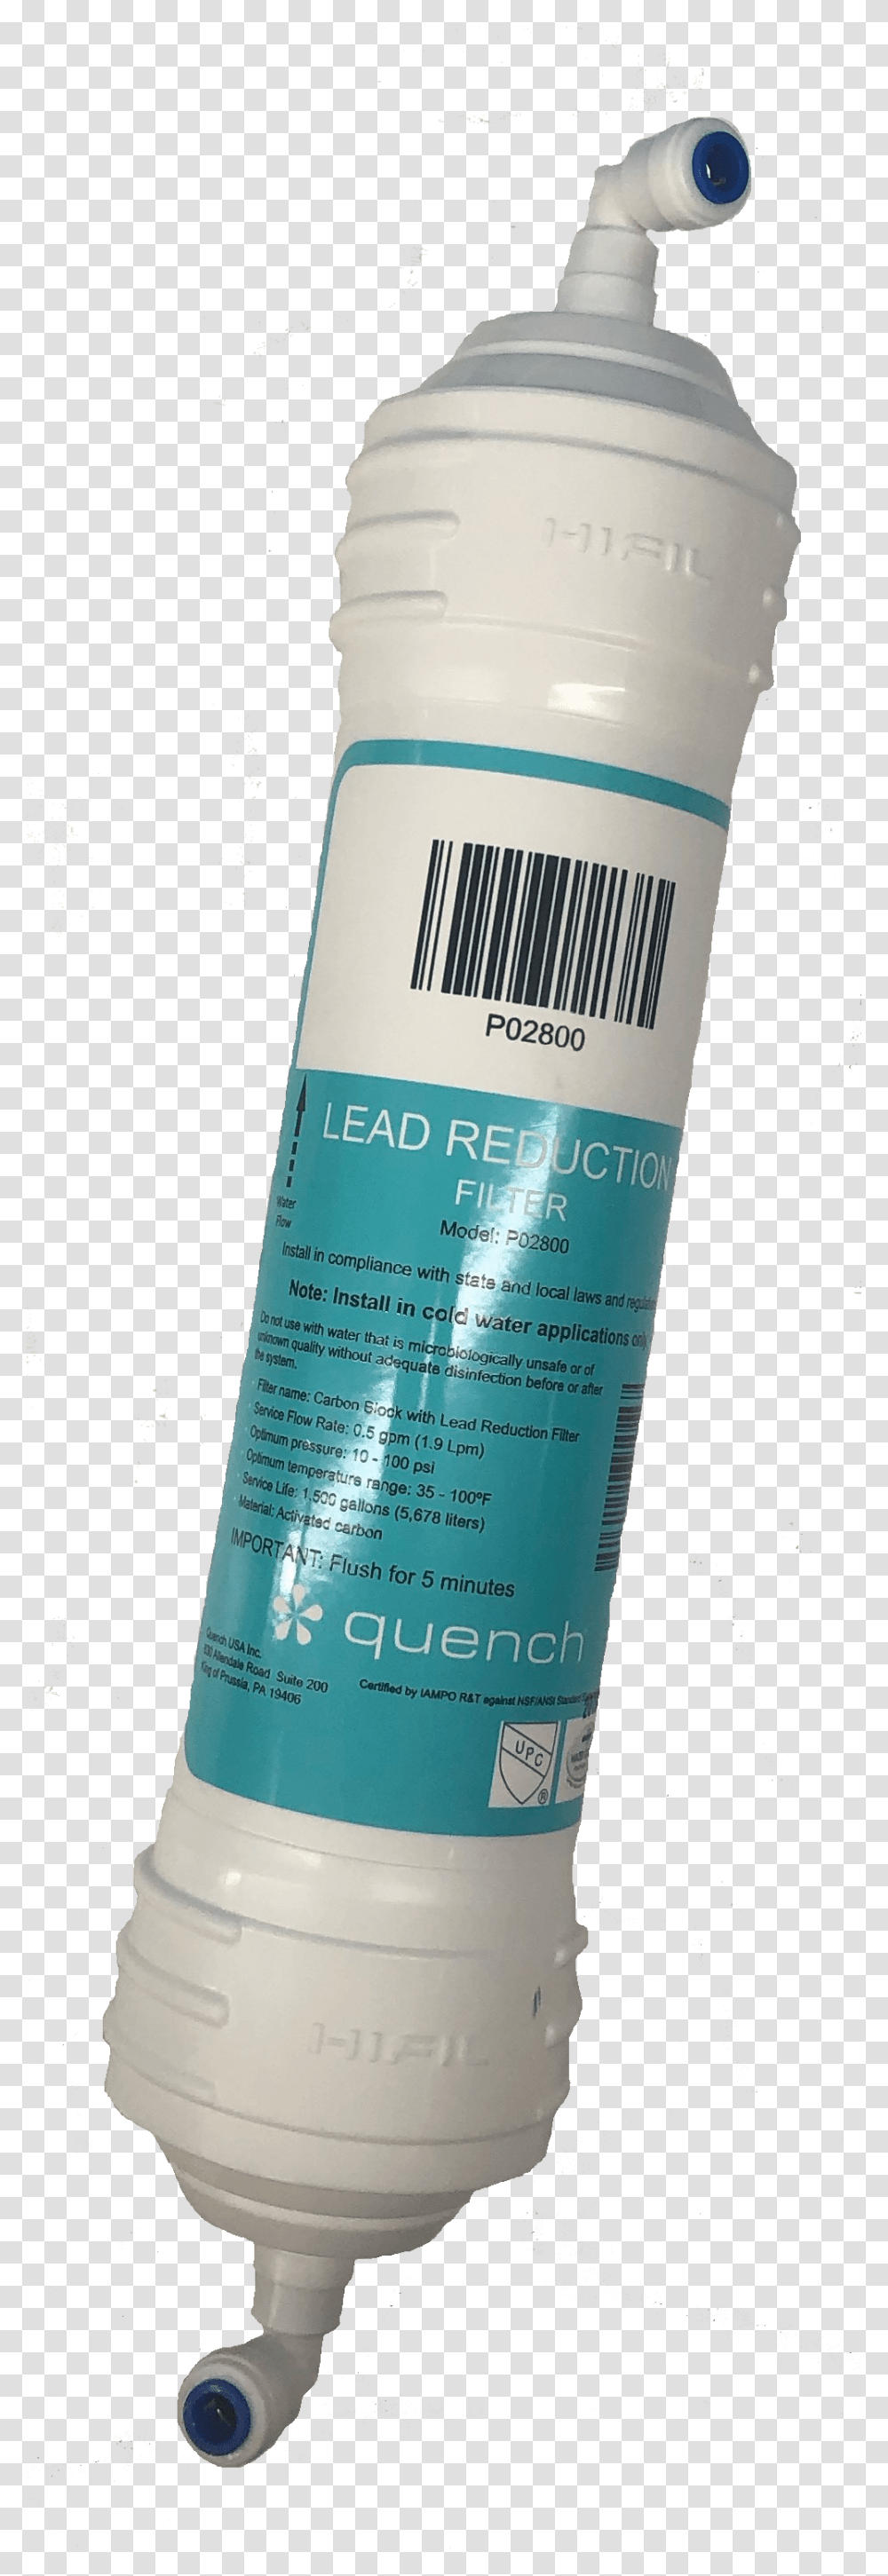 Quench Lead Reduction Filter Cosmetics, Bottle, Shampoo Transparent Png